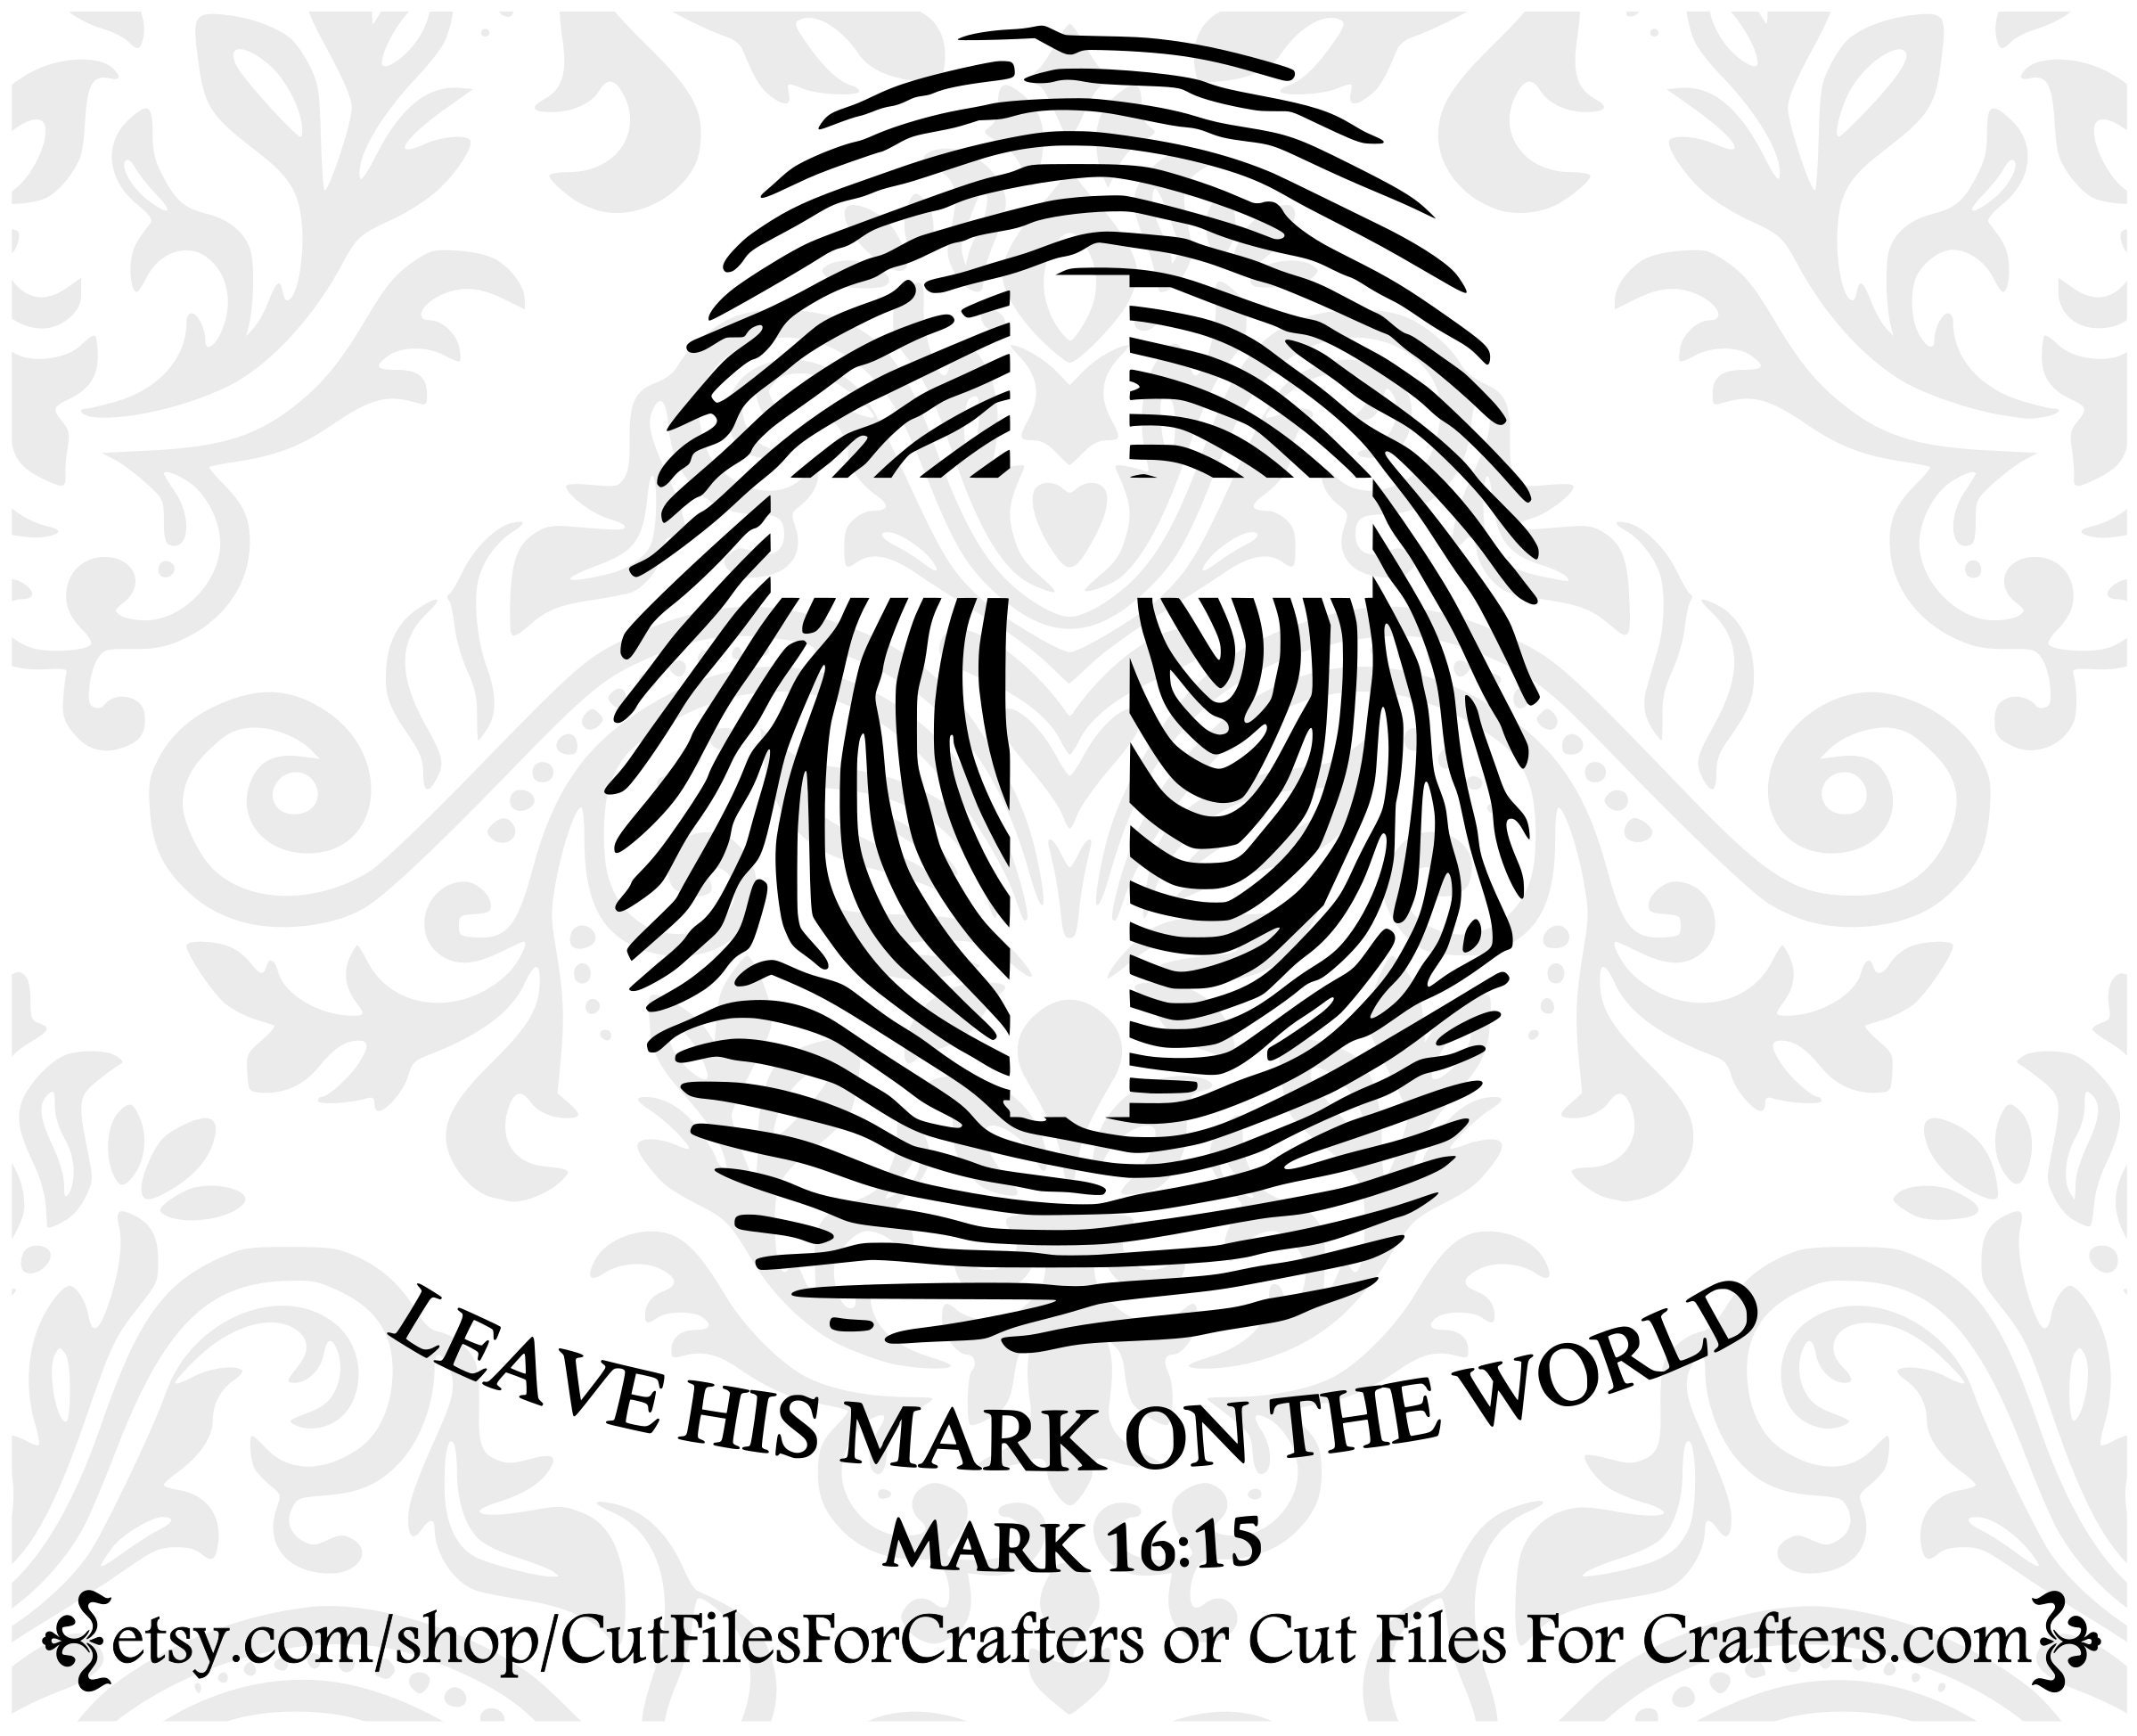 Leave His Mark on the World Svg Mark 16:15 Svg He Said to - Etsy